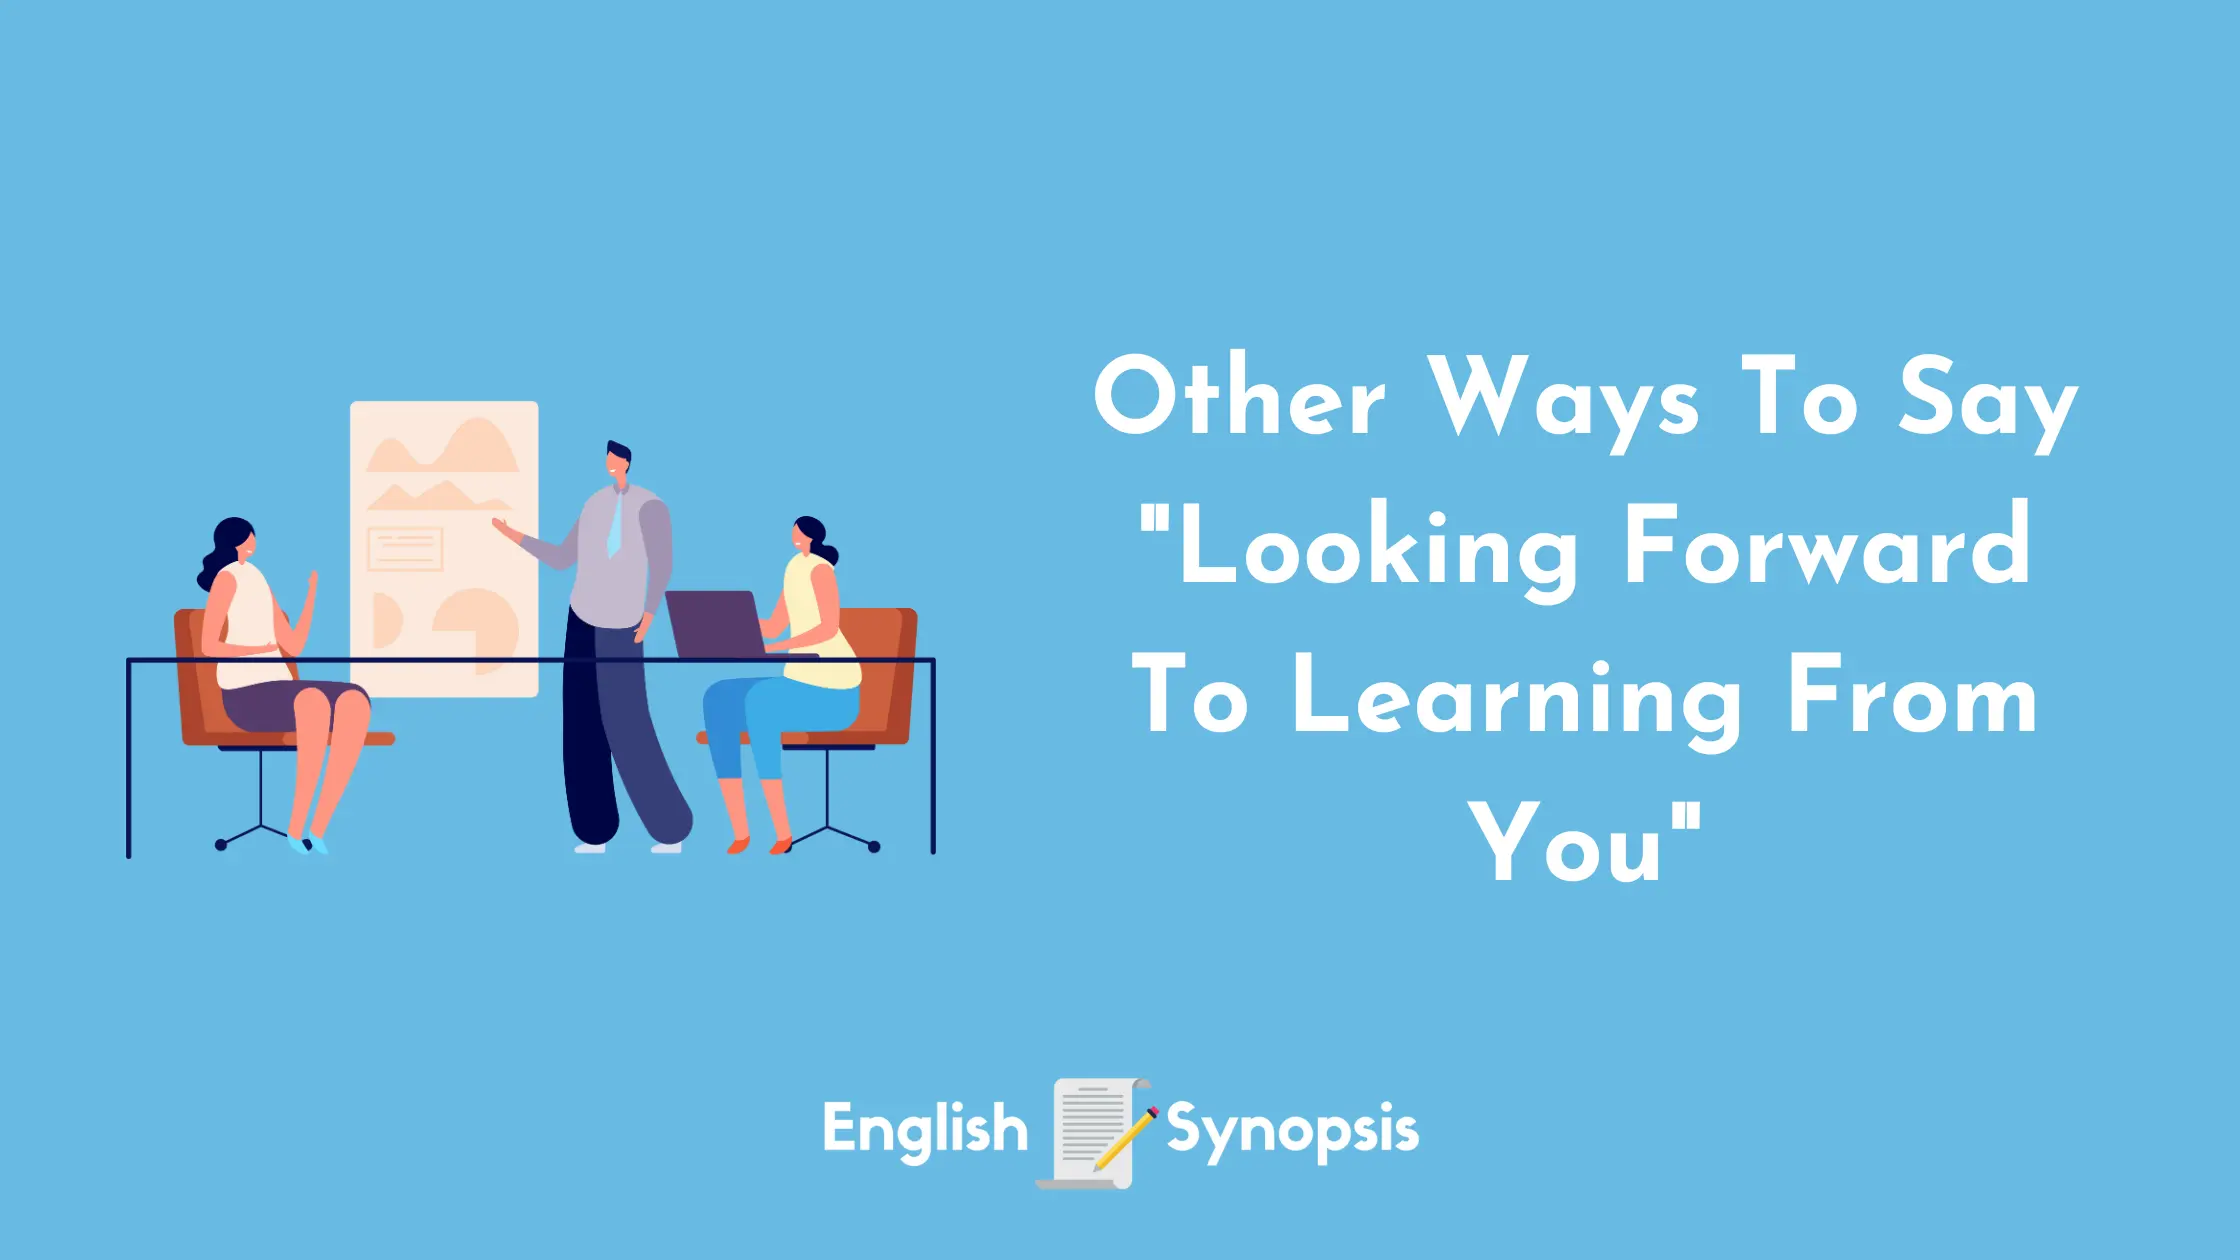 Other Ways To Say "Looking Forward To Learning From You"